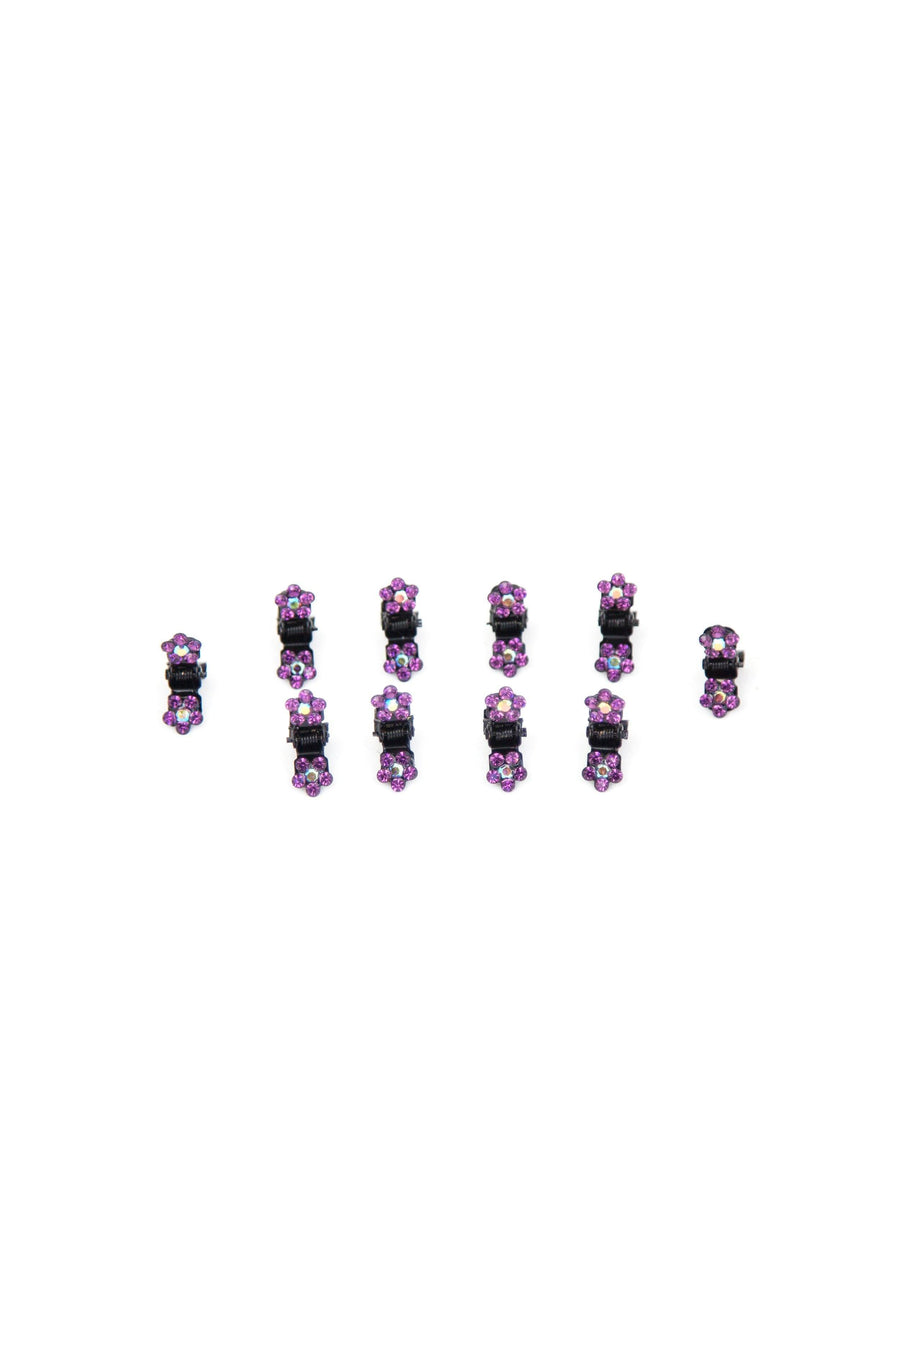 Soho Style Hair Jaws Purple / Pack of 10 Mini Flower Hair Jaws with Crystal Petals Black Body